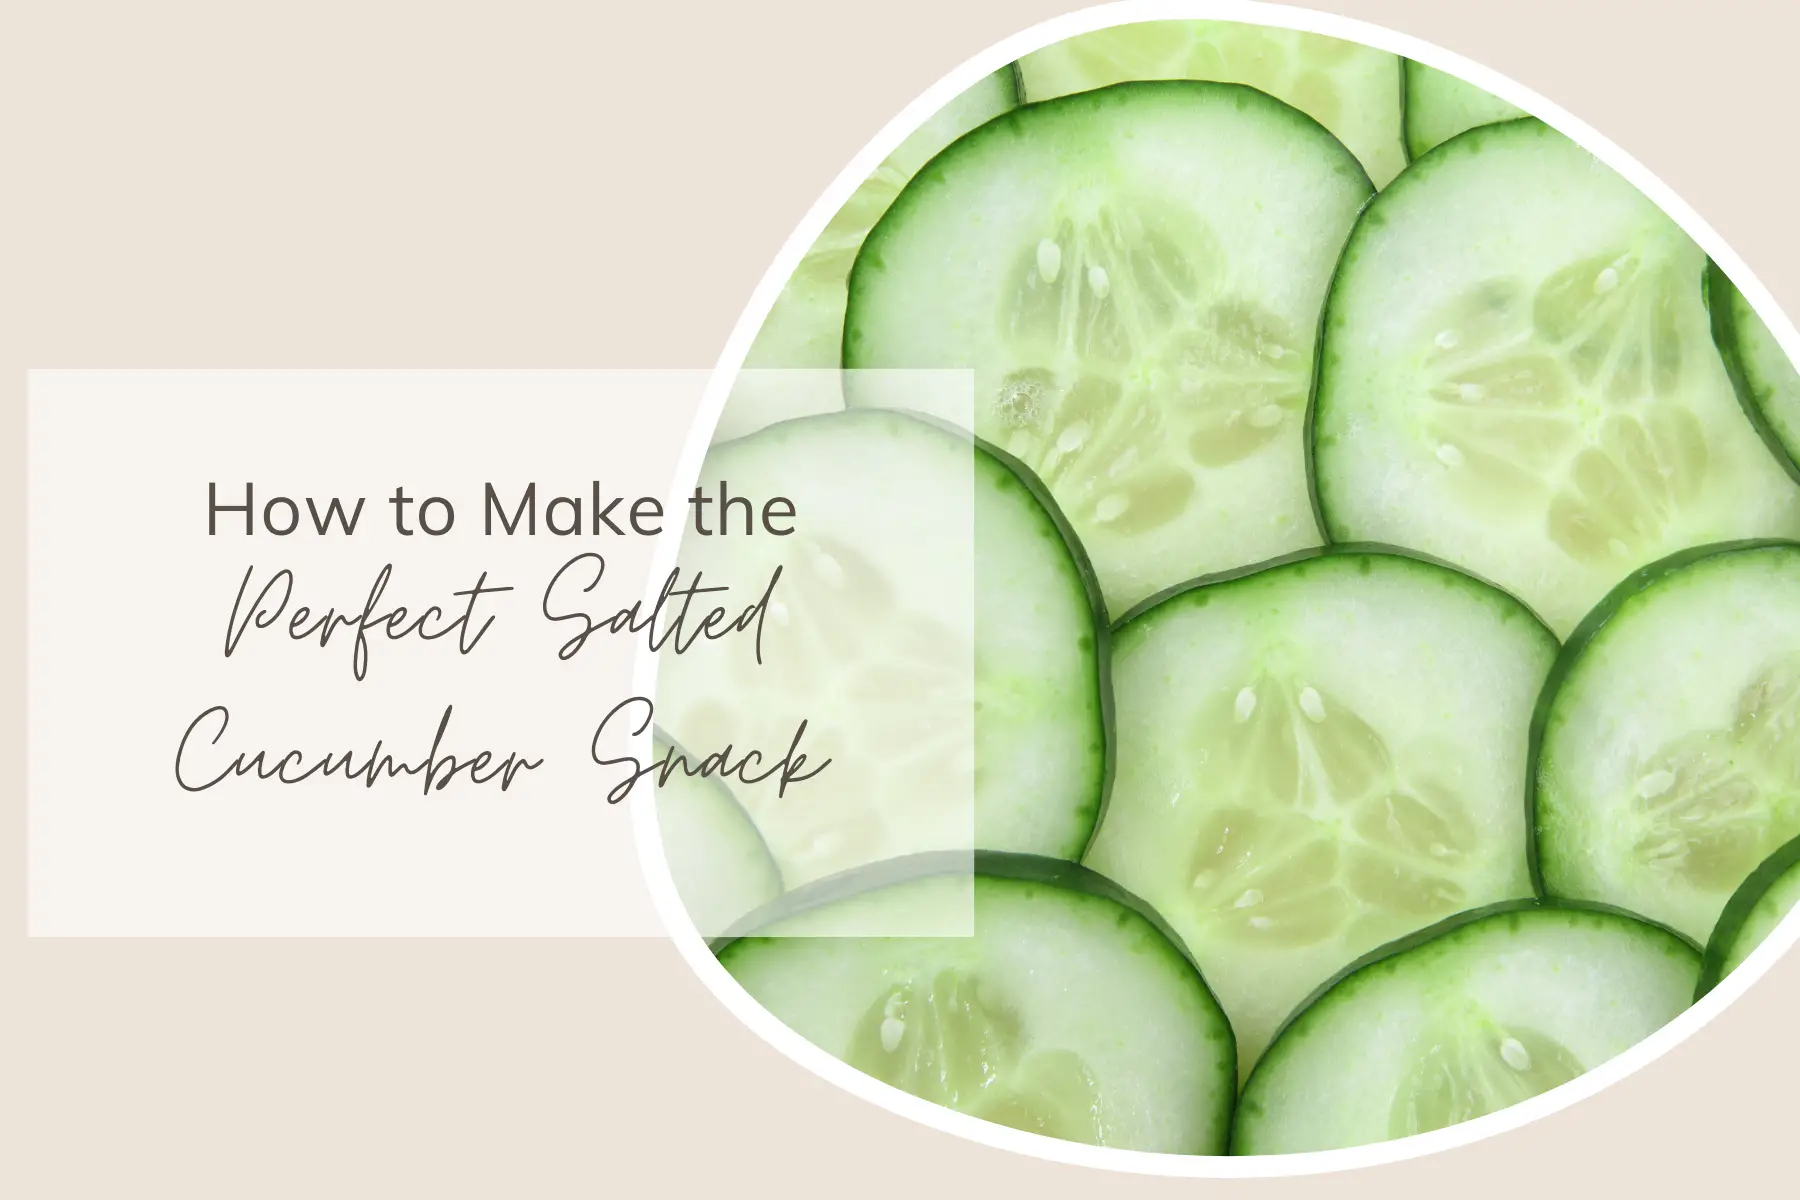 How to Make the Perfect Salted Cucumber Snack